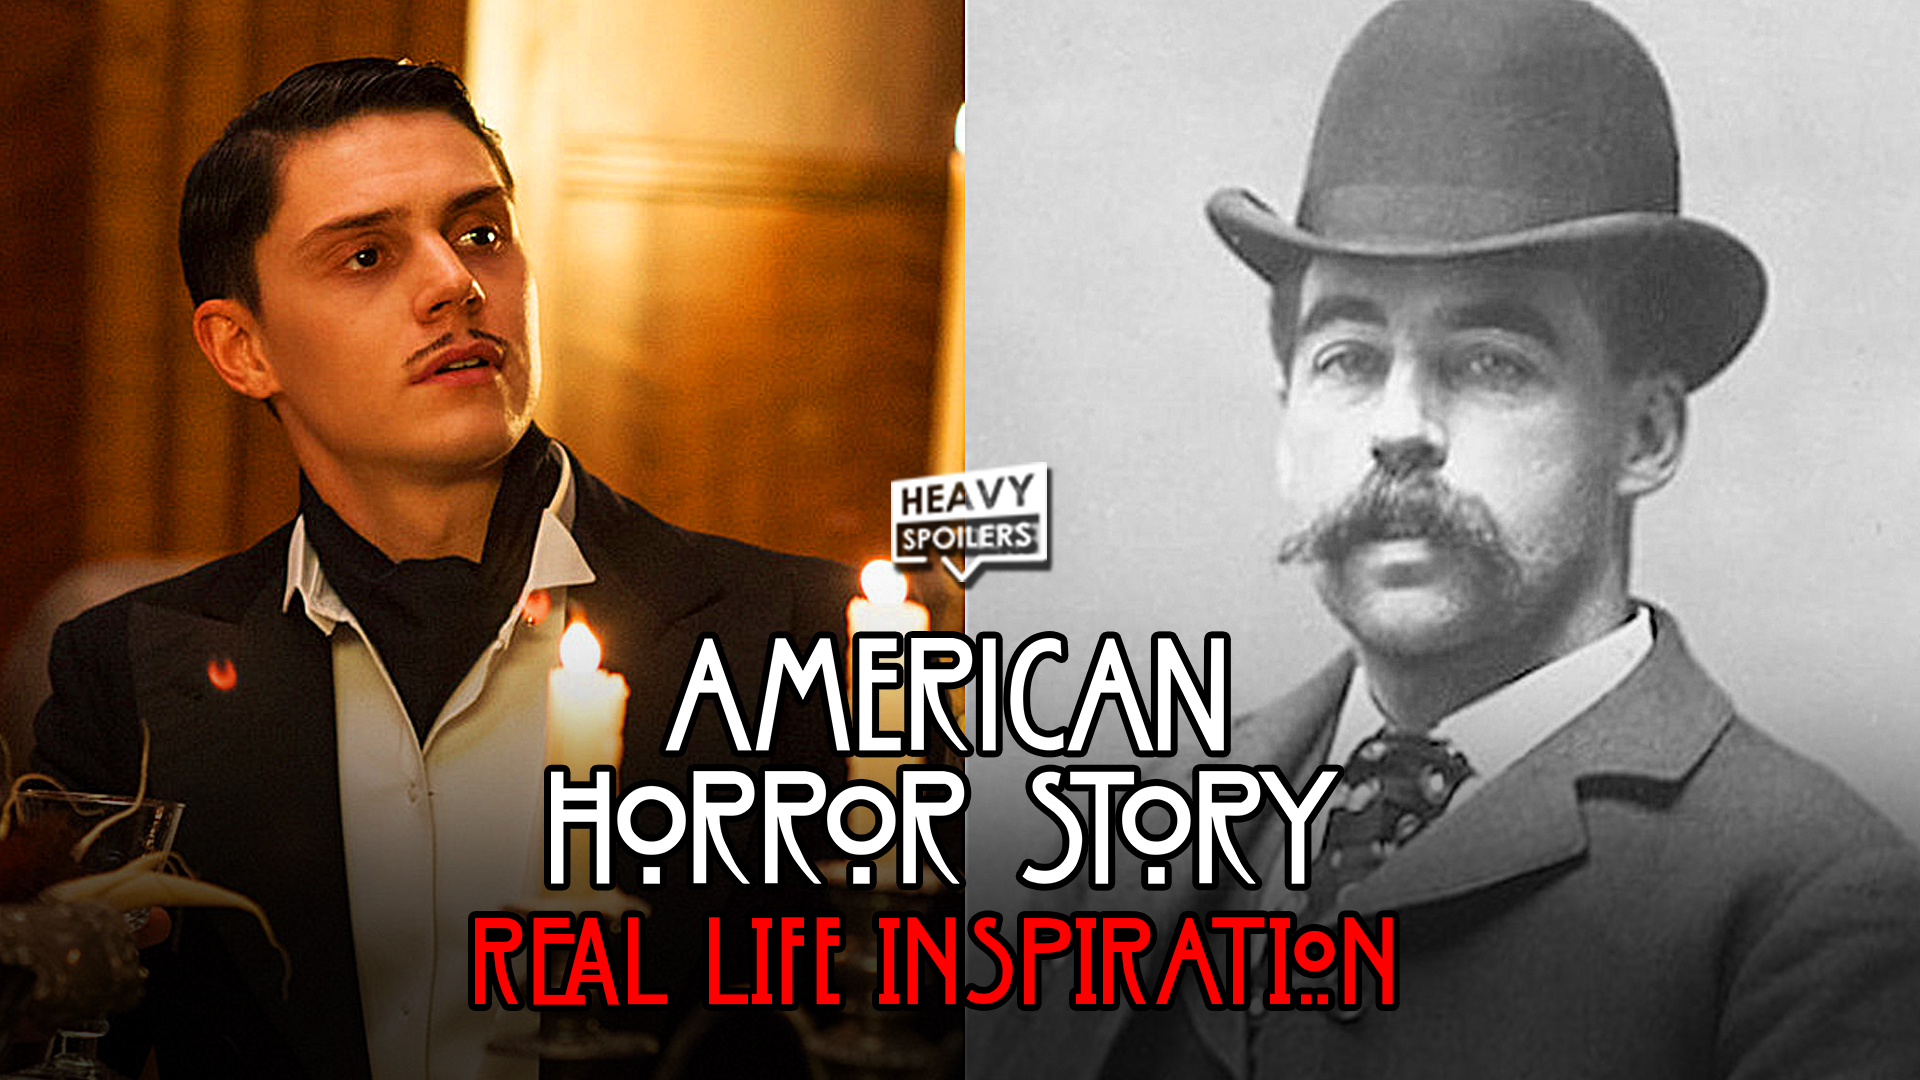 american horror story 1984 explained real life true stories that inspired the season killers locations ghosts hotel hh holmes asylum richard speck